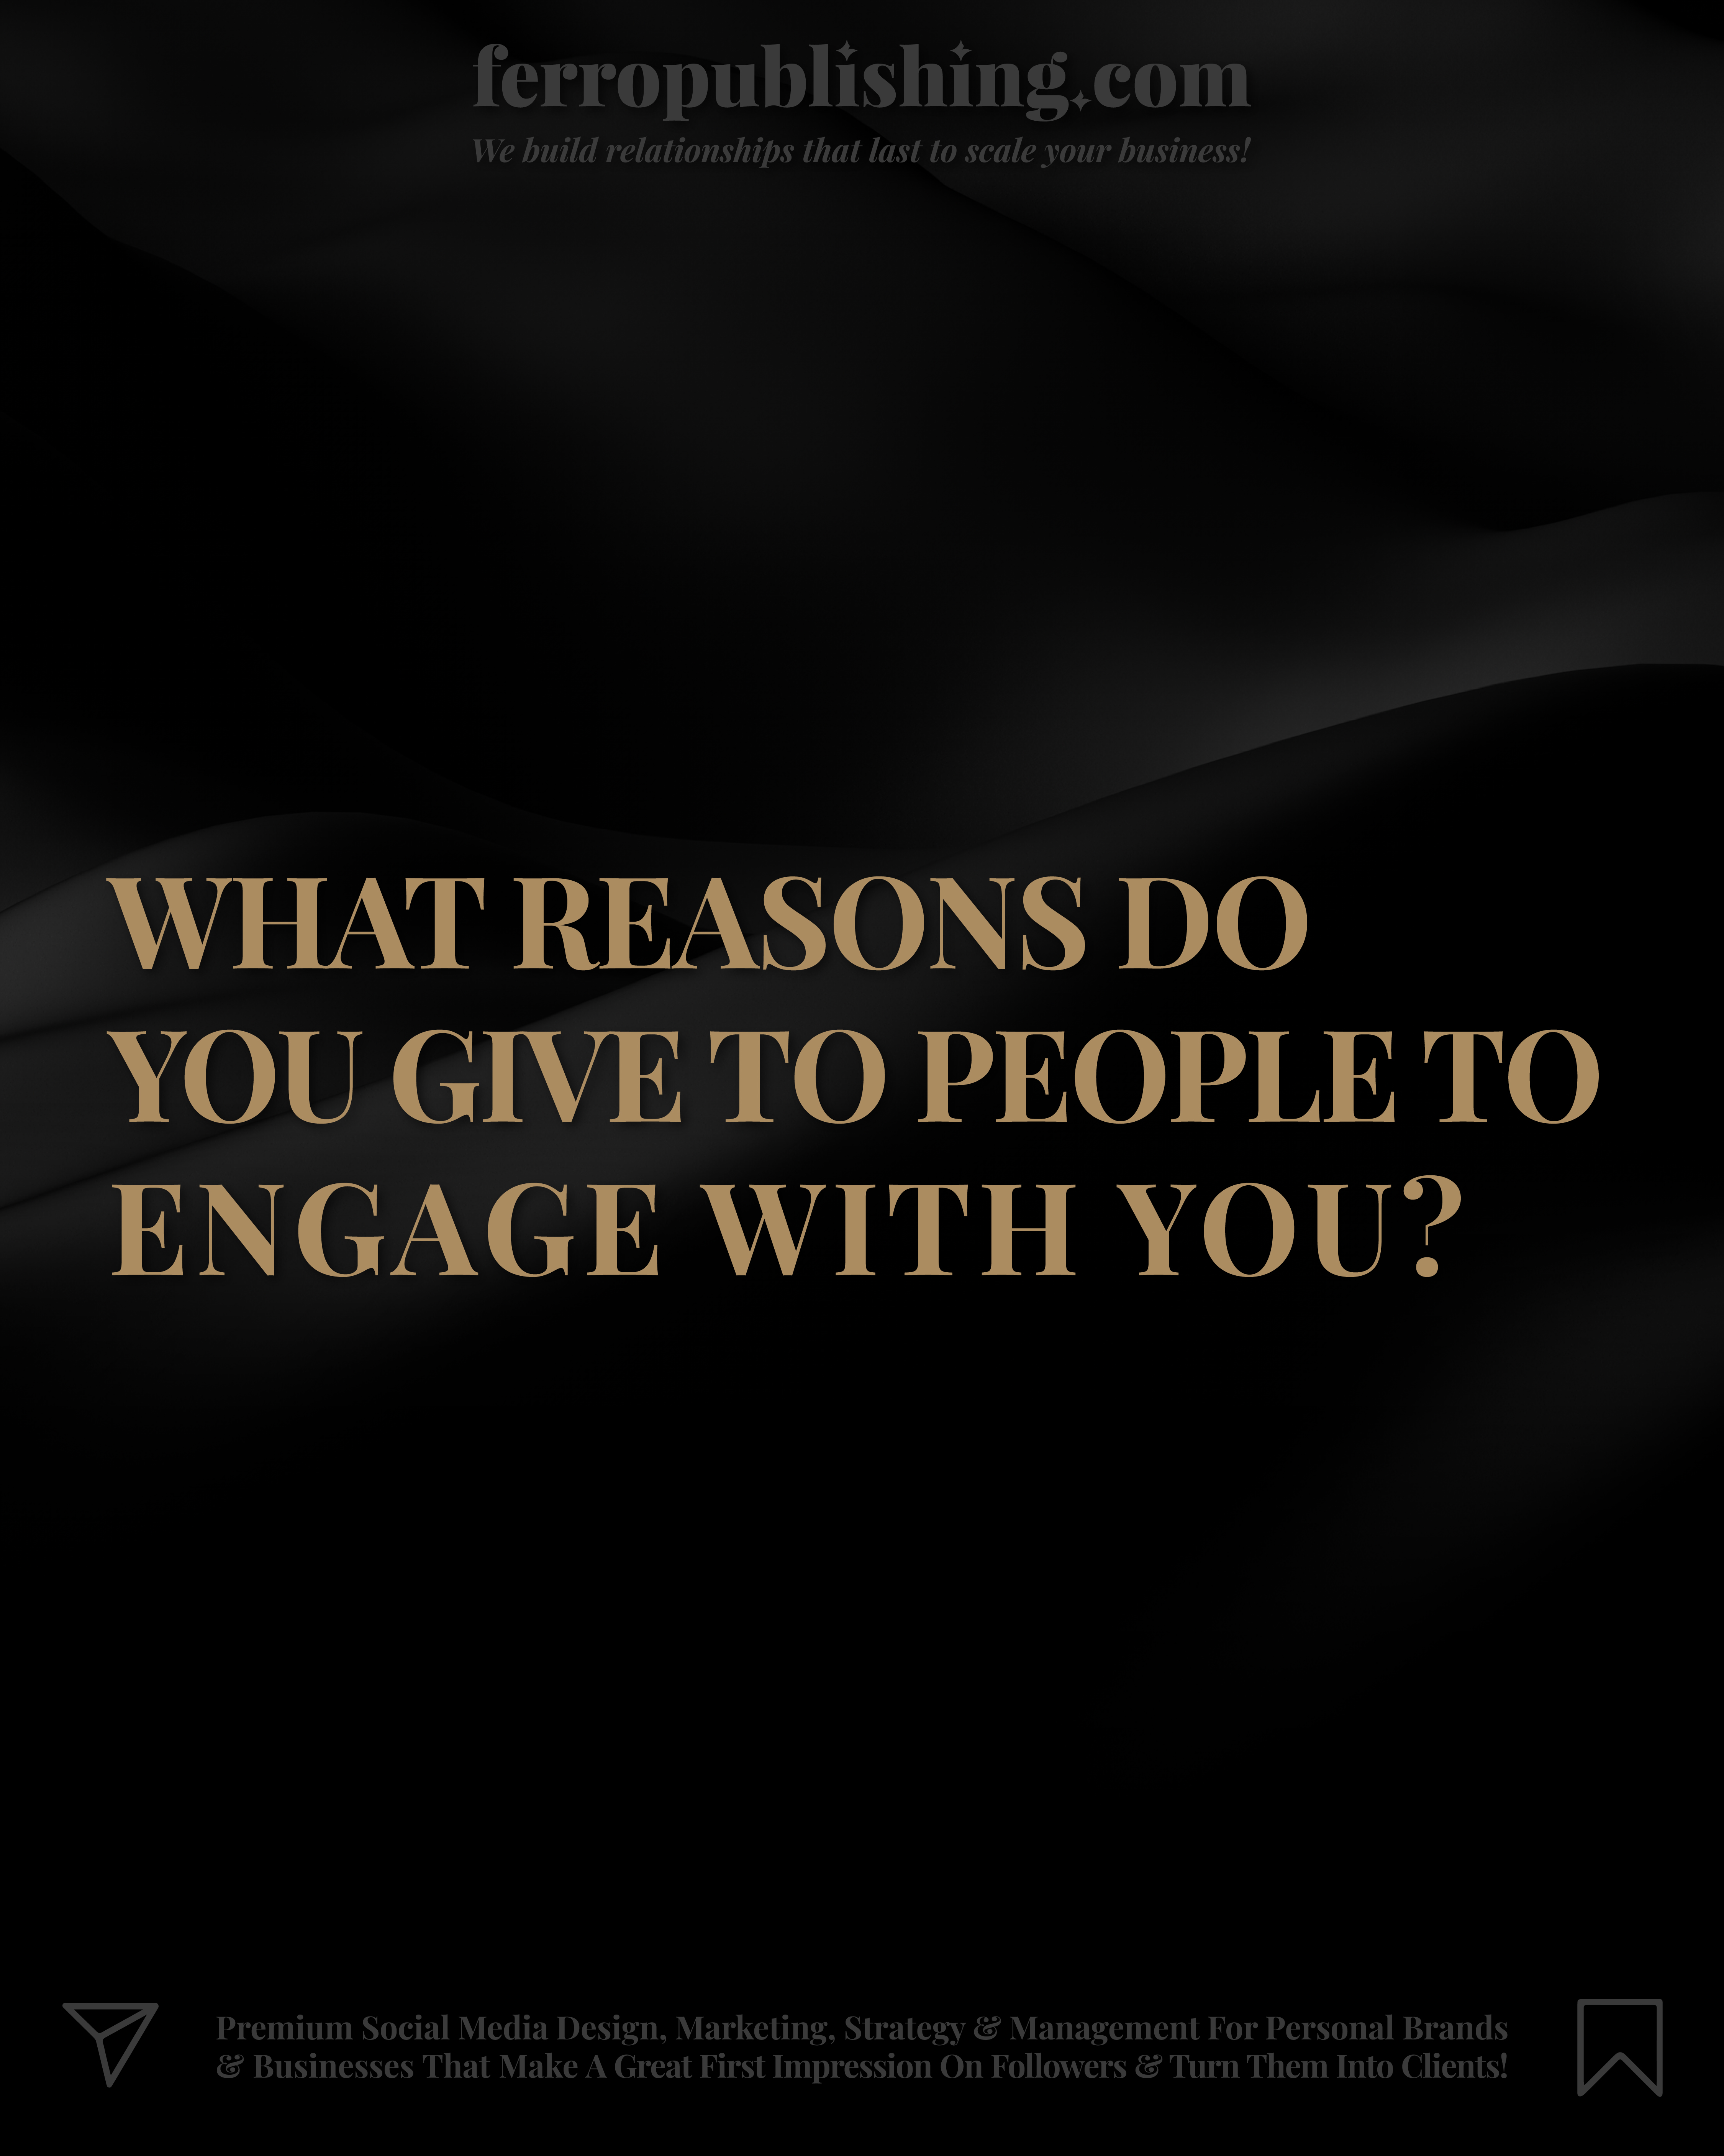 What reasons do you give to people to engage with you?